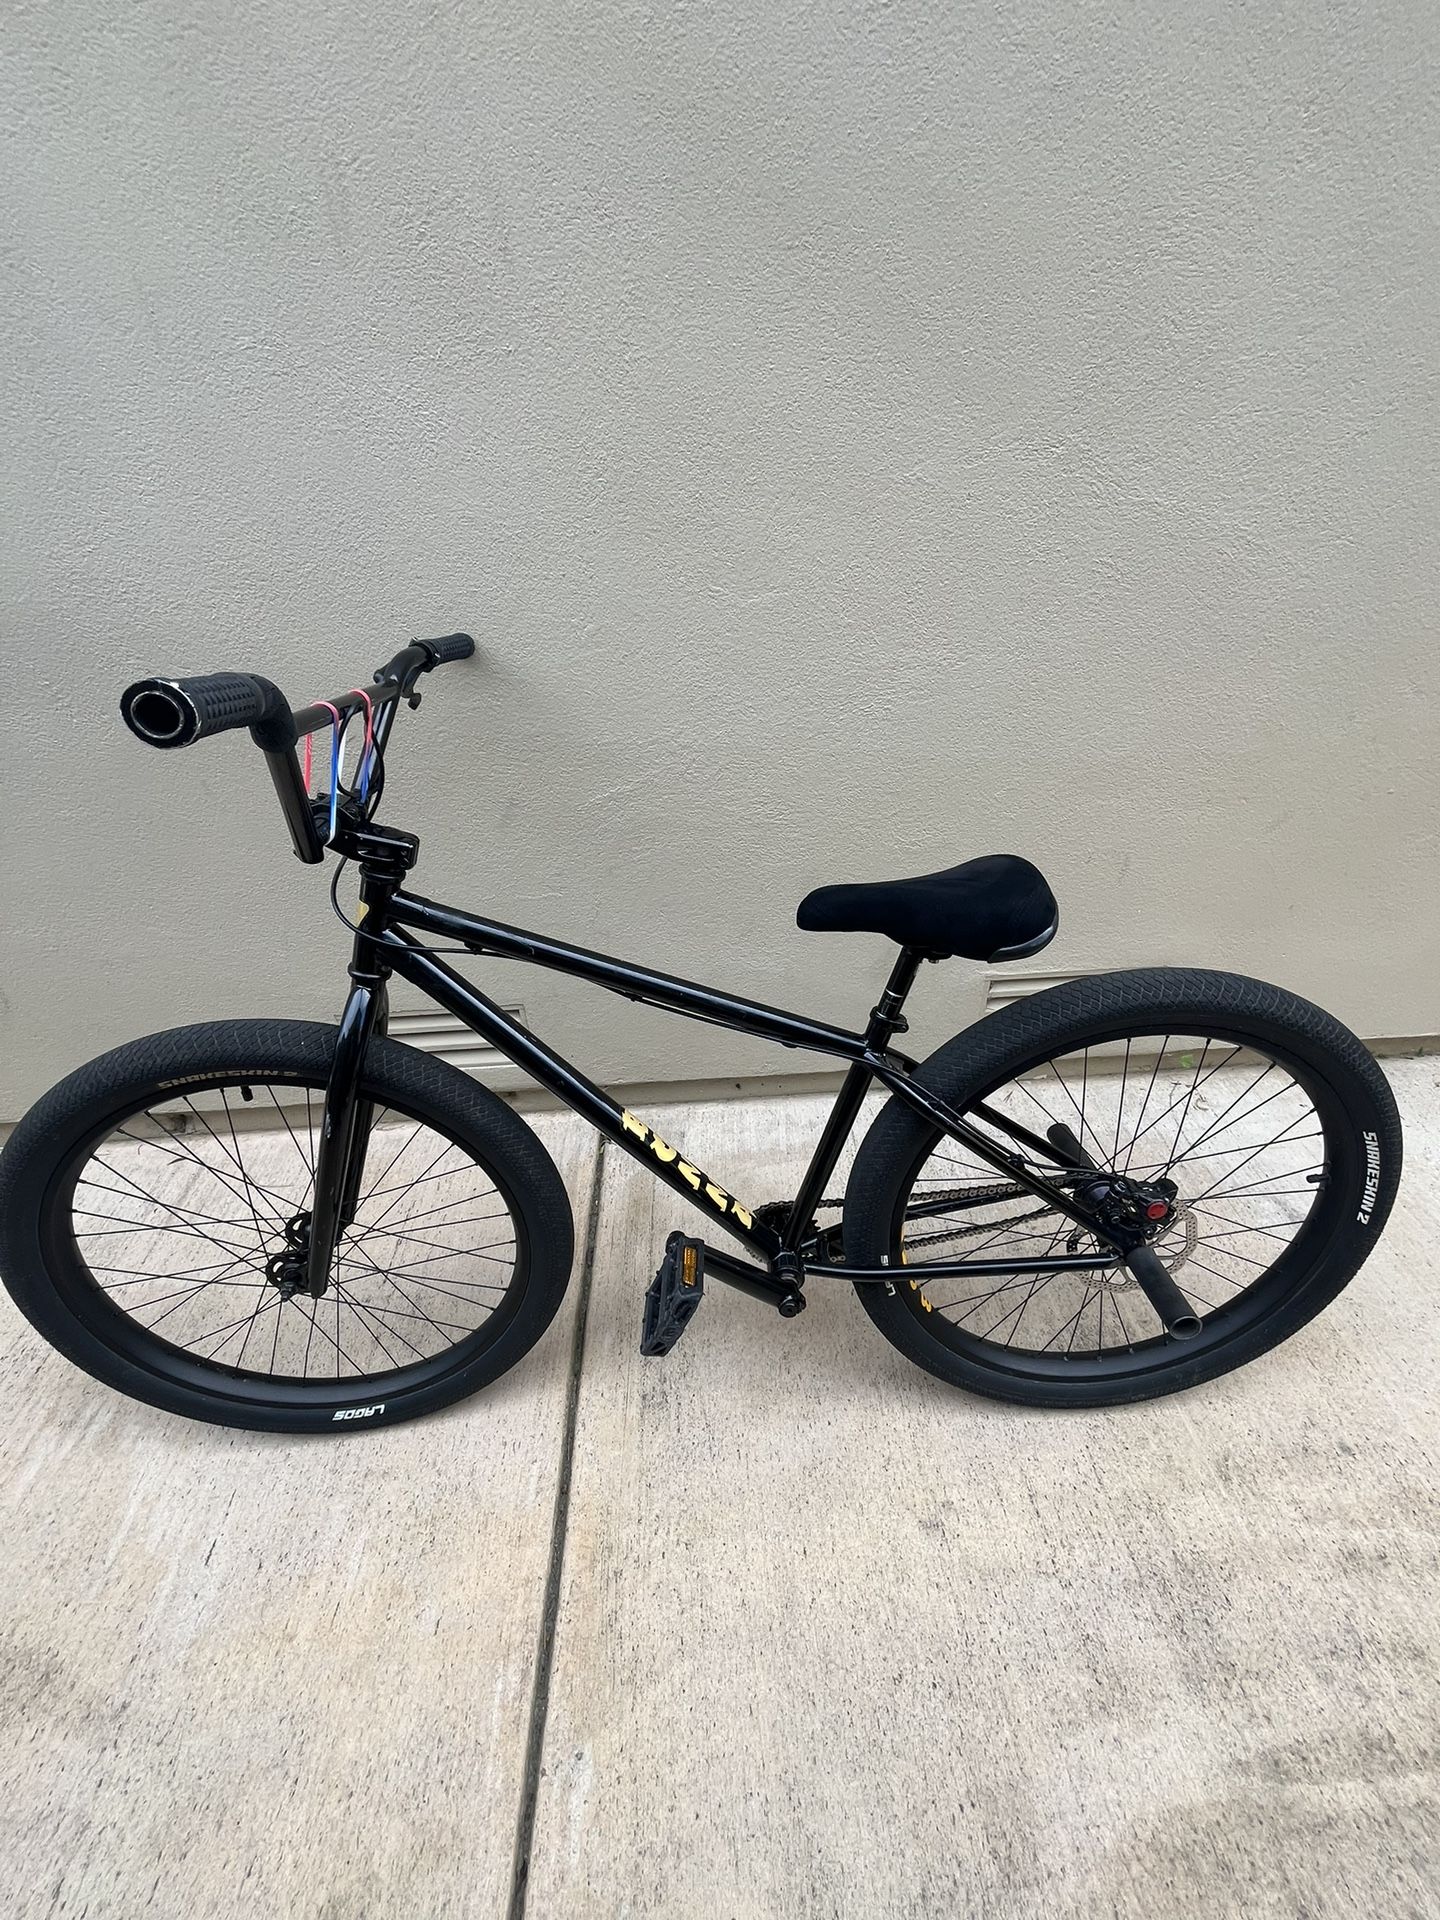 26in Bomma With Odi Grips, New I Chain, Pegs, And Hydro Breaks( Need Money For C100)